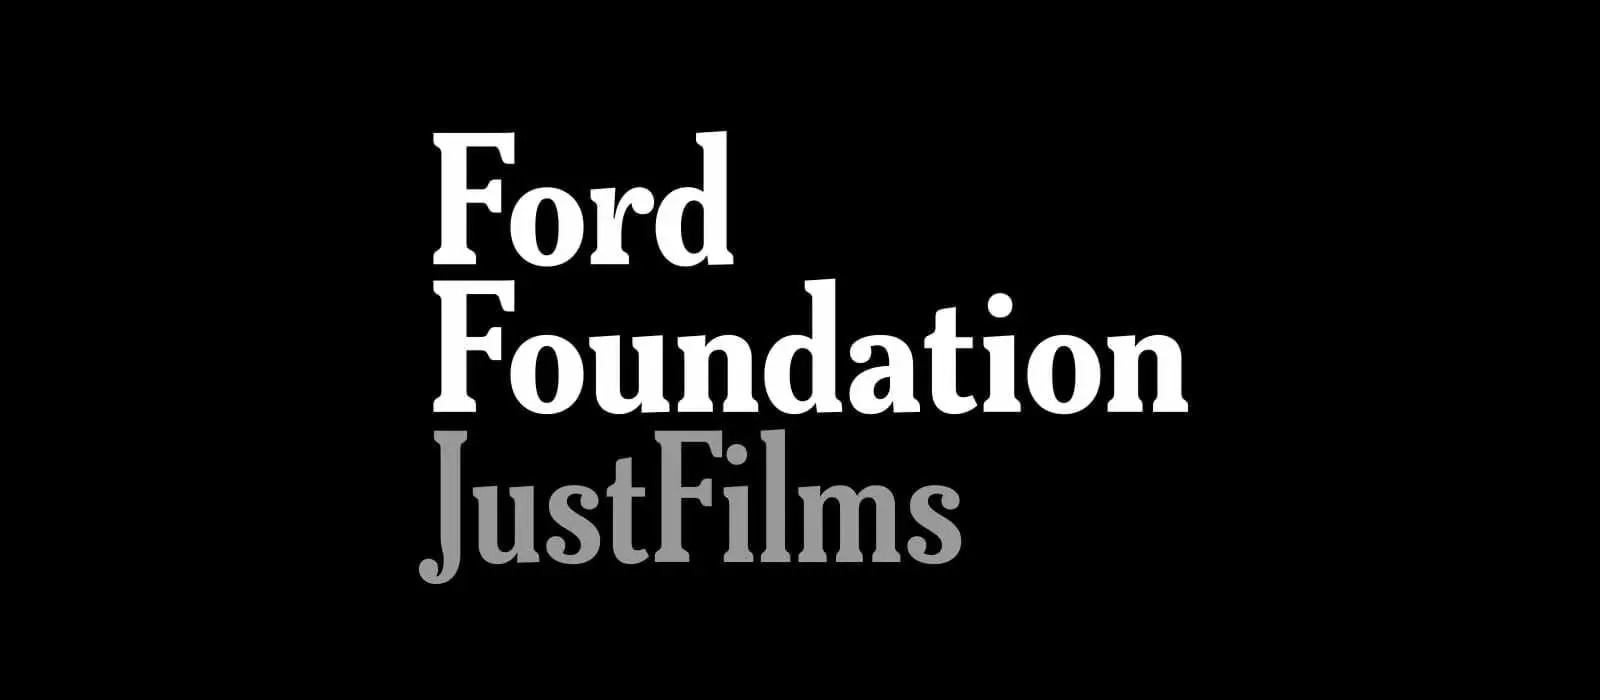 JustFilms logo - White and gray